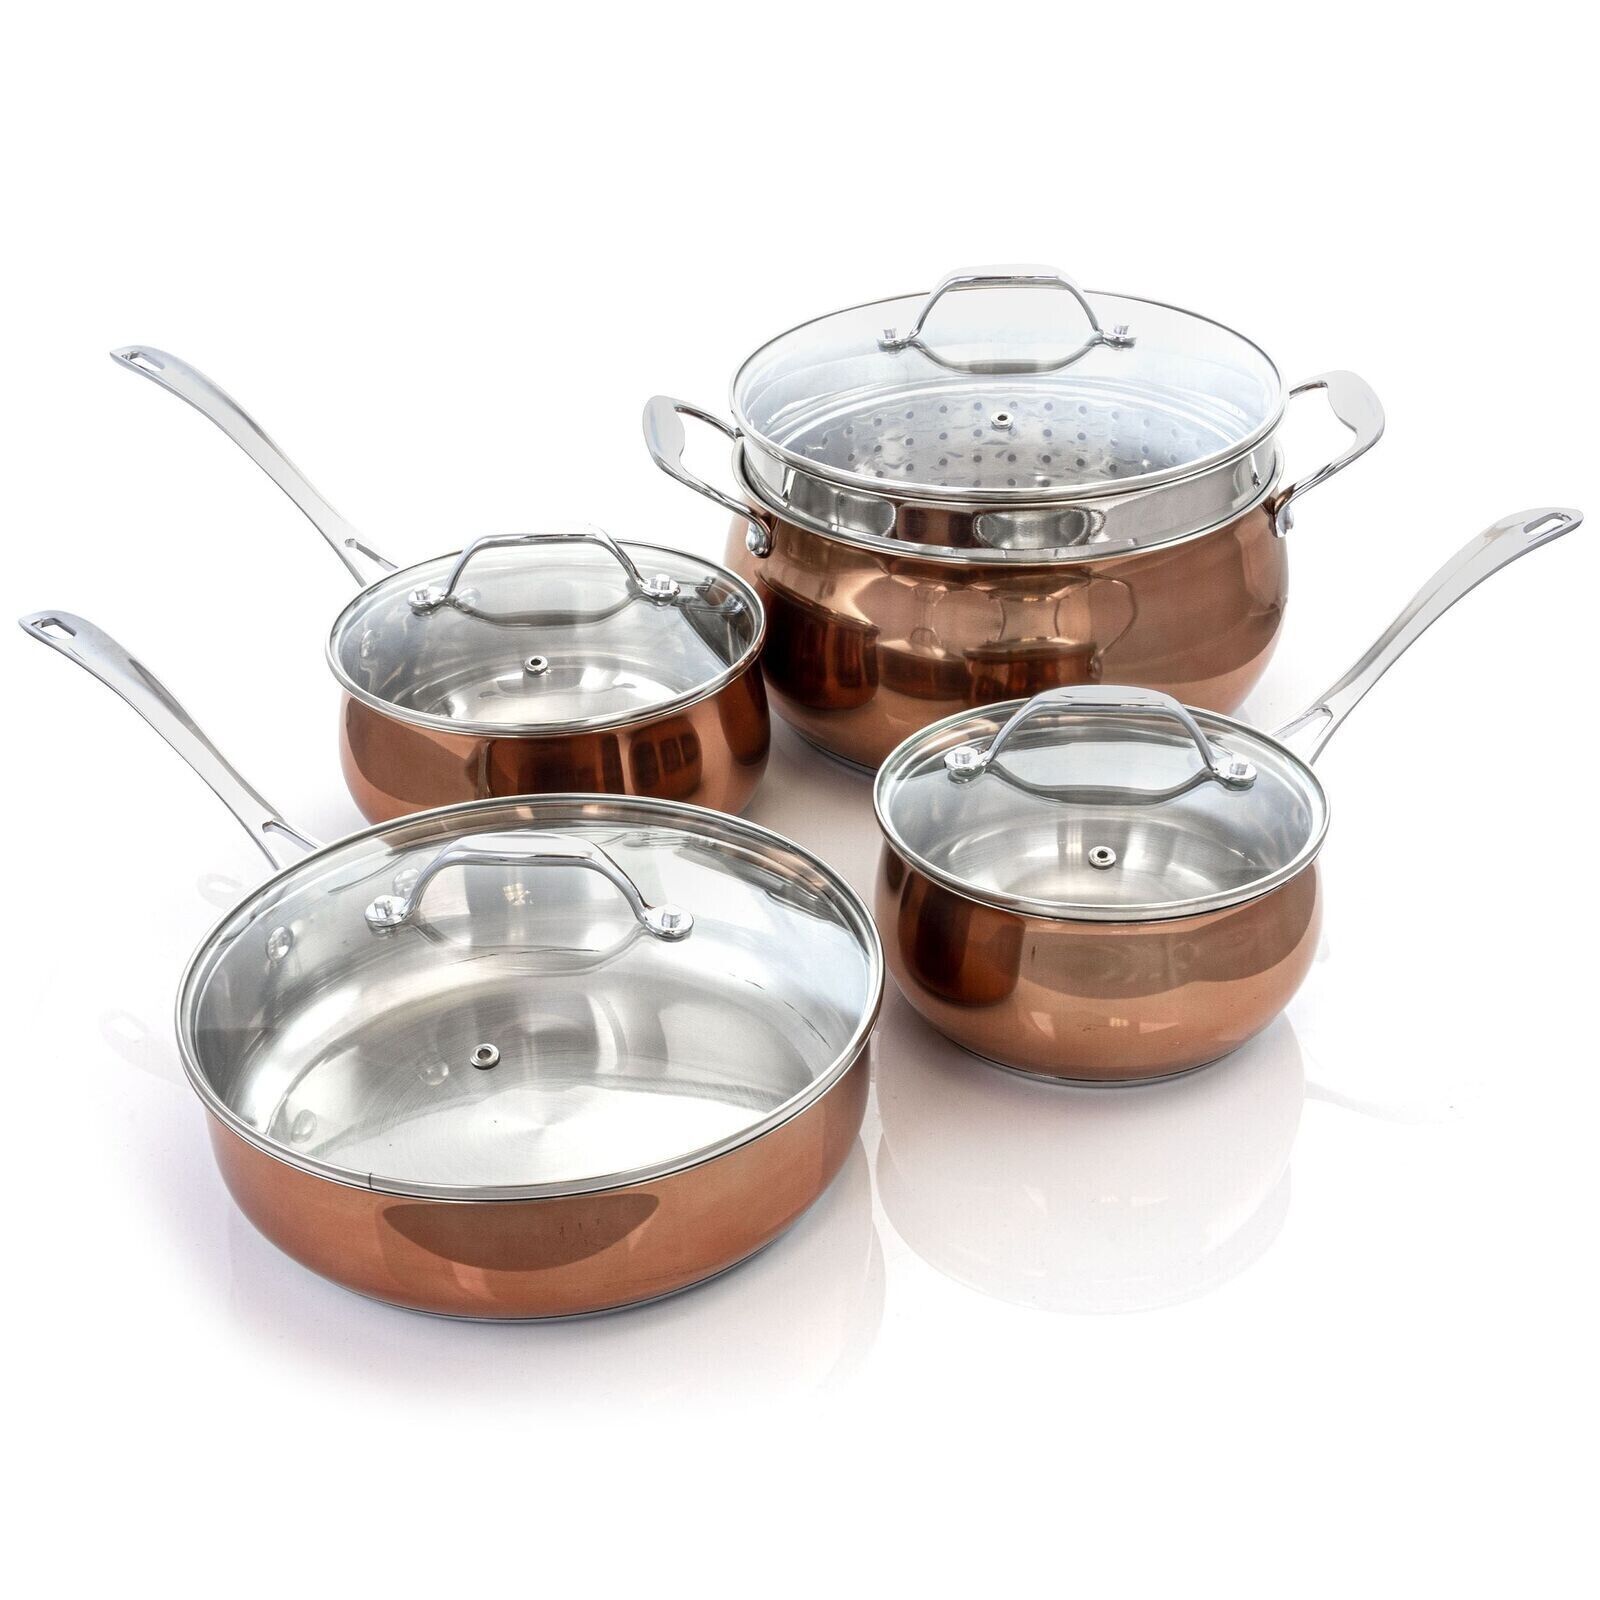 Oster Carabello 9 Piece Stainless Steel Cookware Combo Set in Copper - $88.06